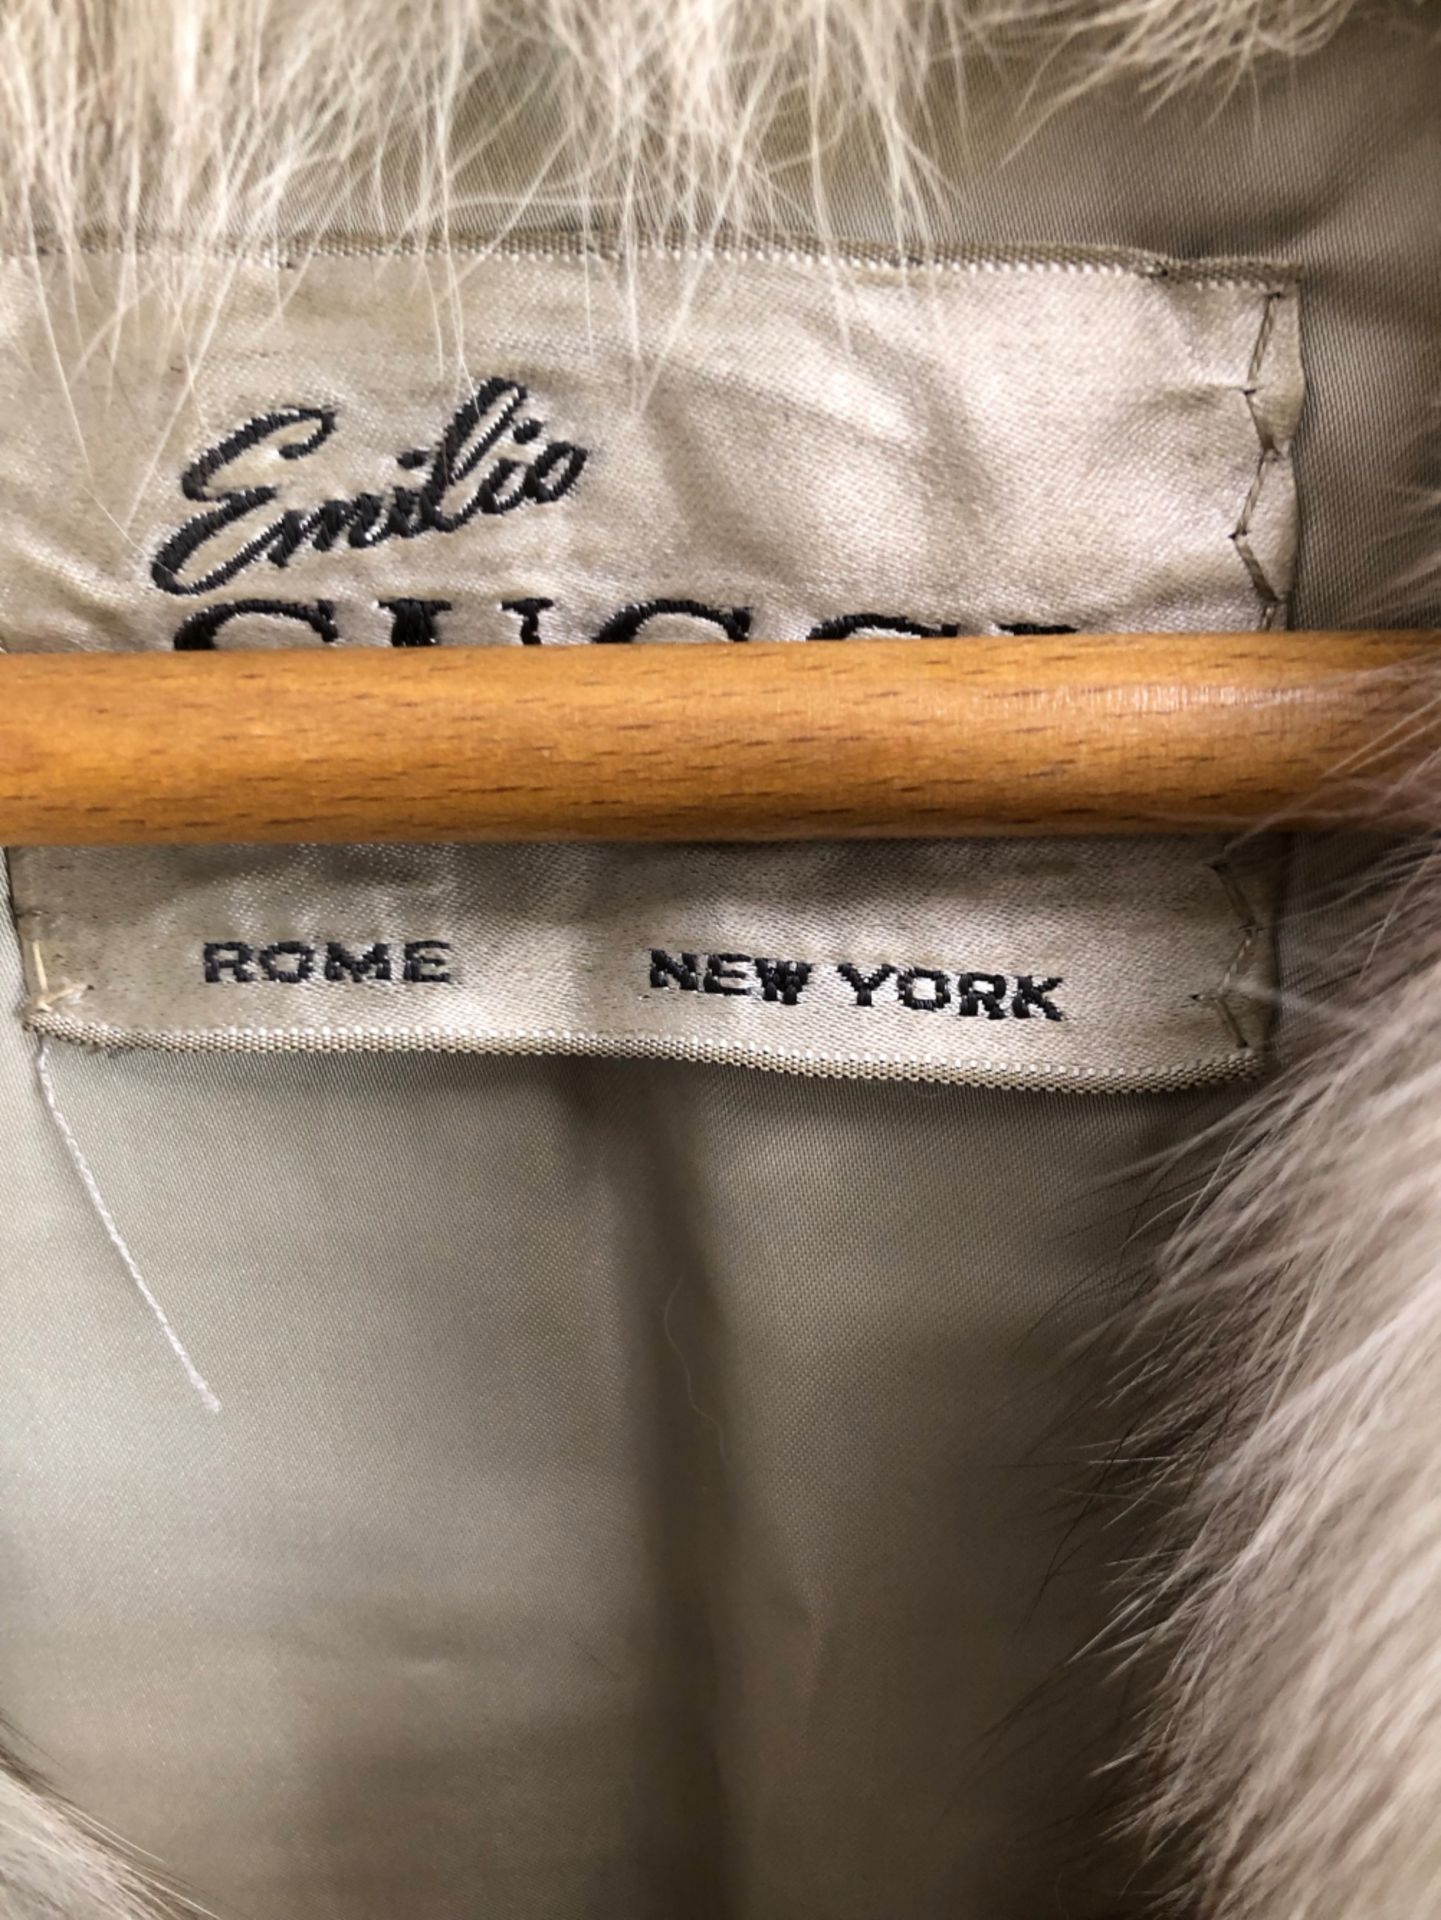 FUR COAT: EMILIO GUCCI, WHITE WITH HORIZONTAL GREY TINGED BANDS, WITH ZIPPED BAND TO ADJUST THE - Image 5 of 17